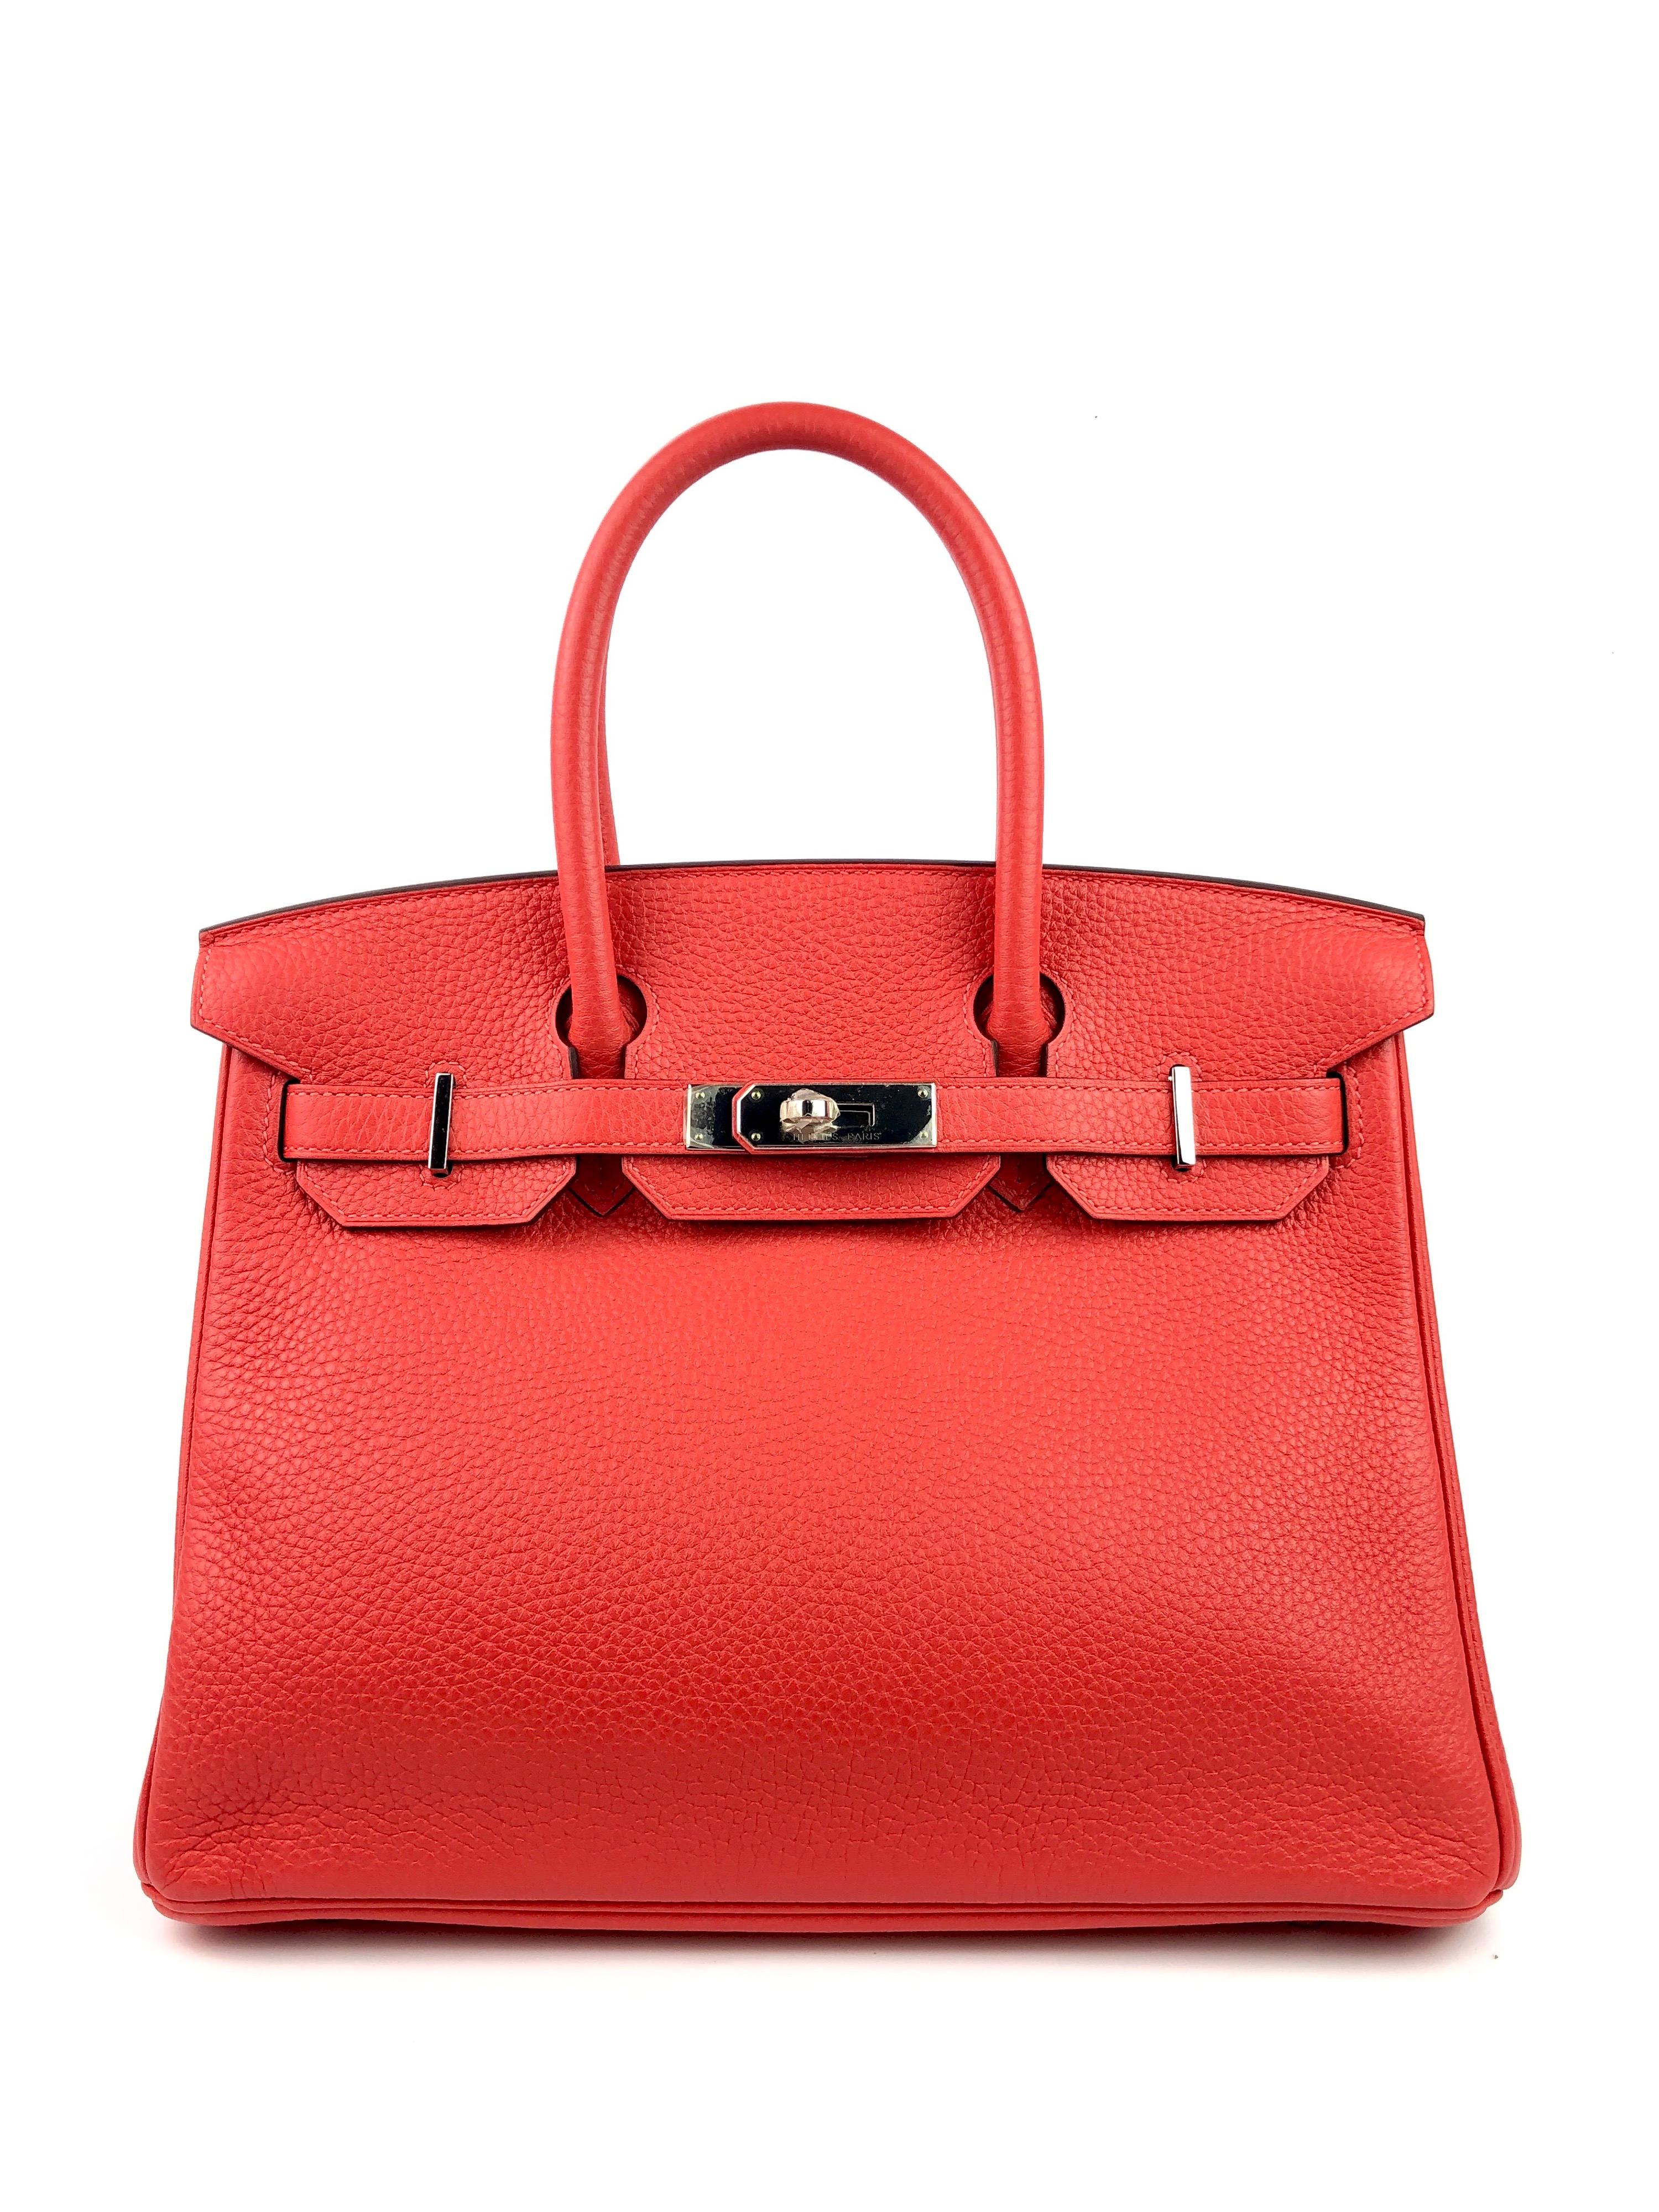 Hermes Birkin 30 Rouge Pivoine Red Togo Palladium Hardware W/ Receipt. Excellent Condition plastic on hardware and excellent structure and corners.

Shop with Confidence from Lux Addicts. Authenticity Guaranteed! 